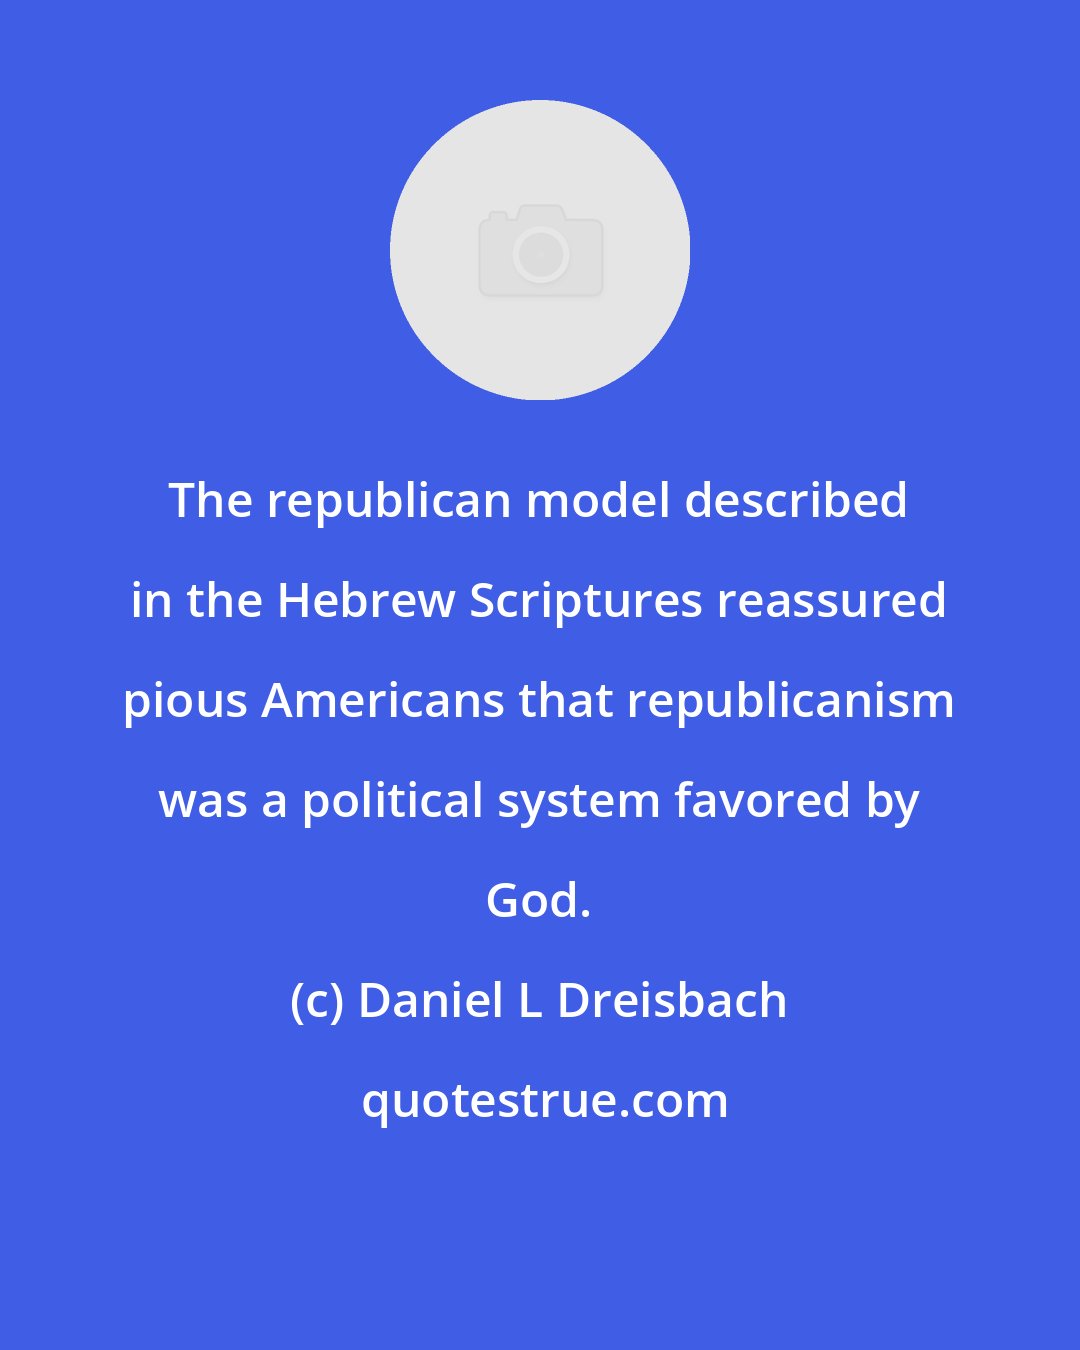 Daniel L Dreisbach: The republican model described in the Hebrew Scriptures reassured pious Americans that republicanism was a political system favored by God.